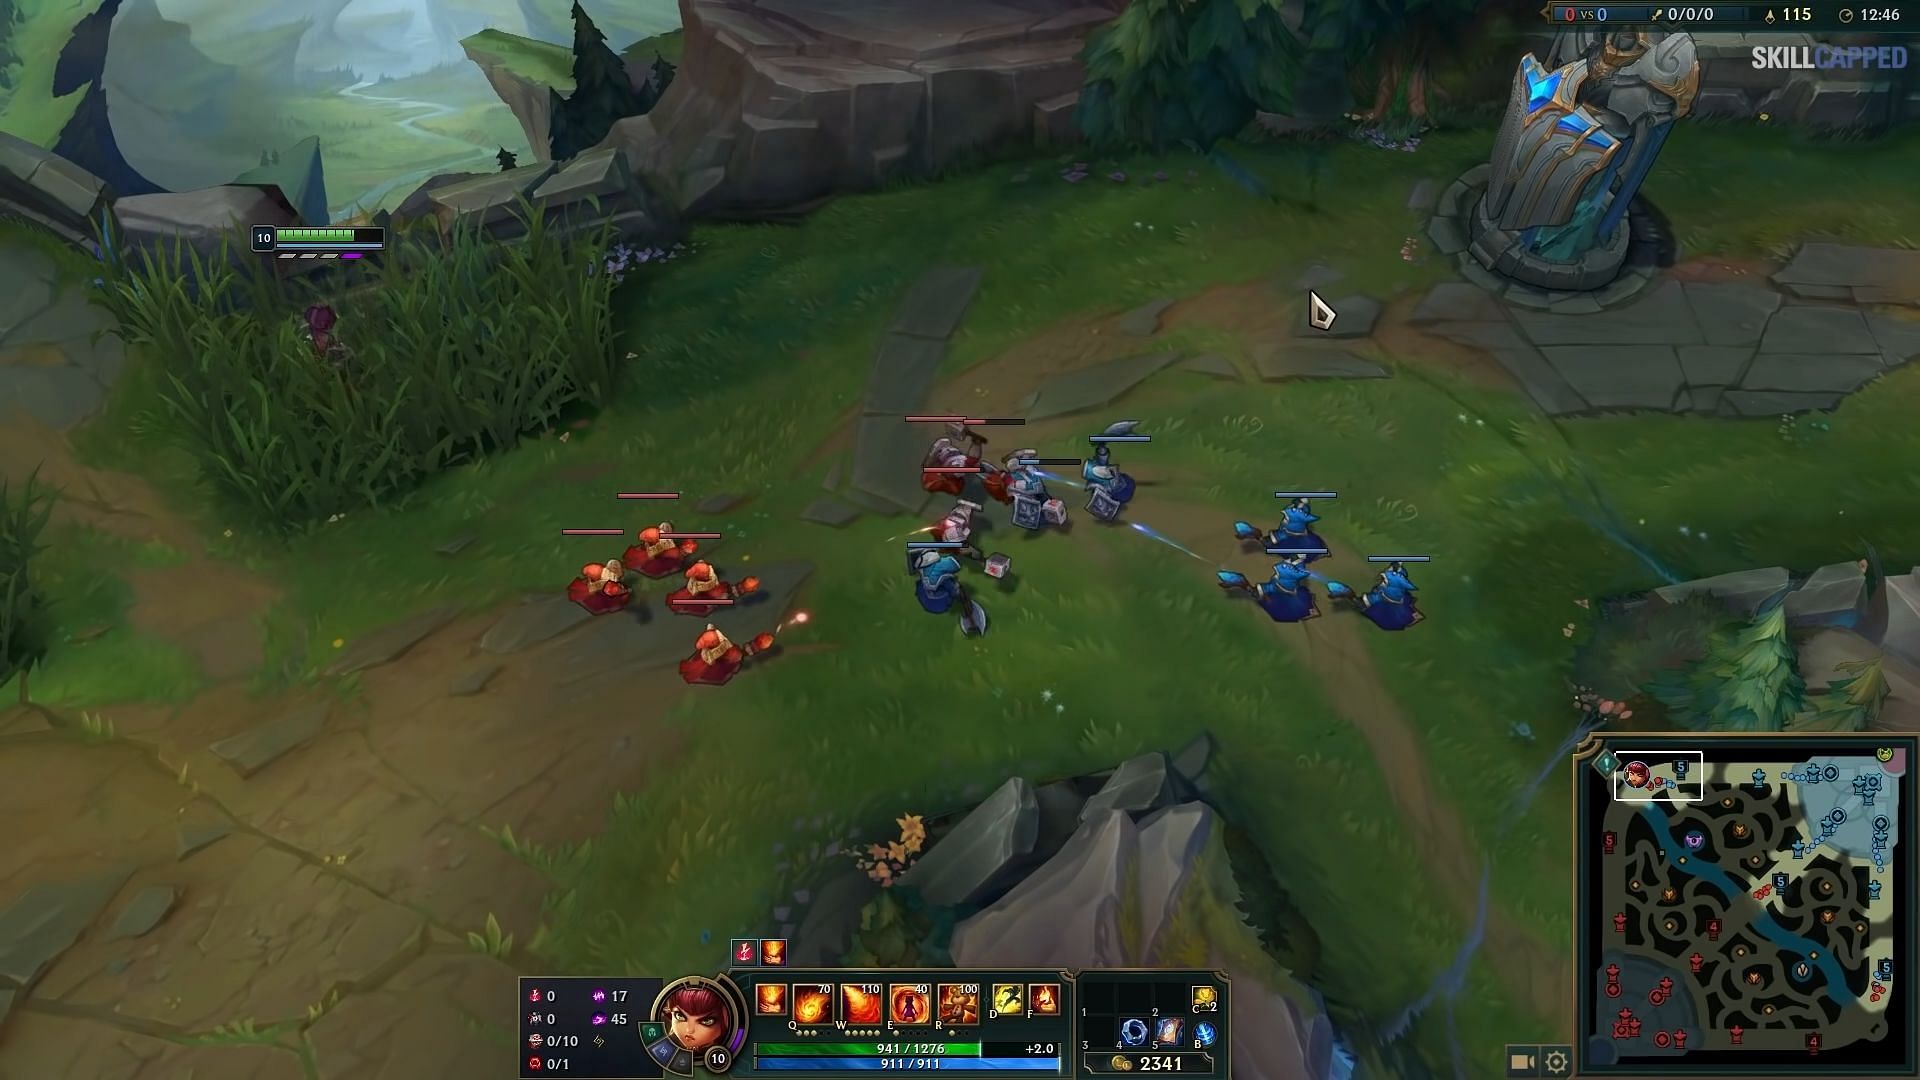 Bouncing occurs in League of Legends when the ally minion is being pushed back by the enemy tower in the presence of an enemy wave (Image via Skill Capped/Youtube)